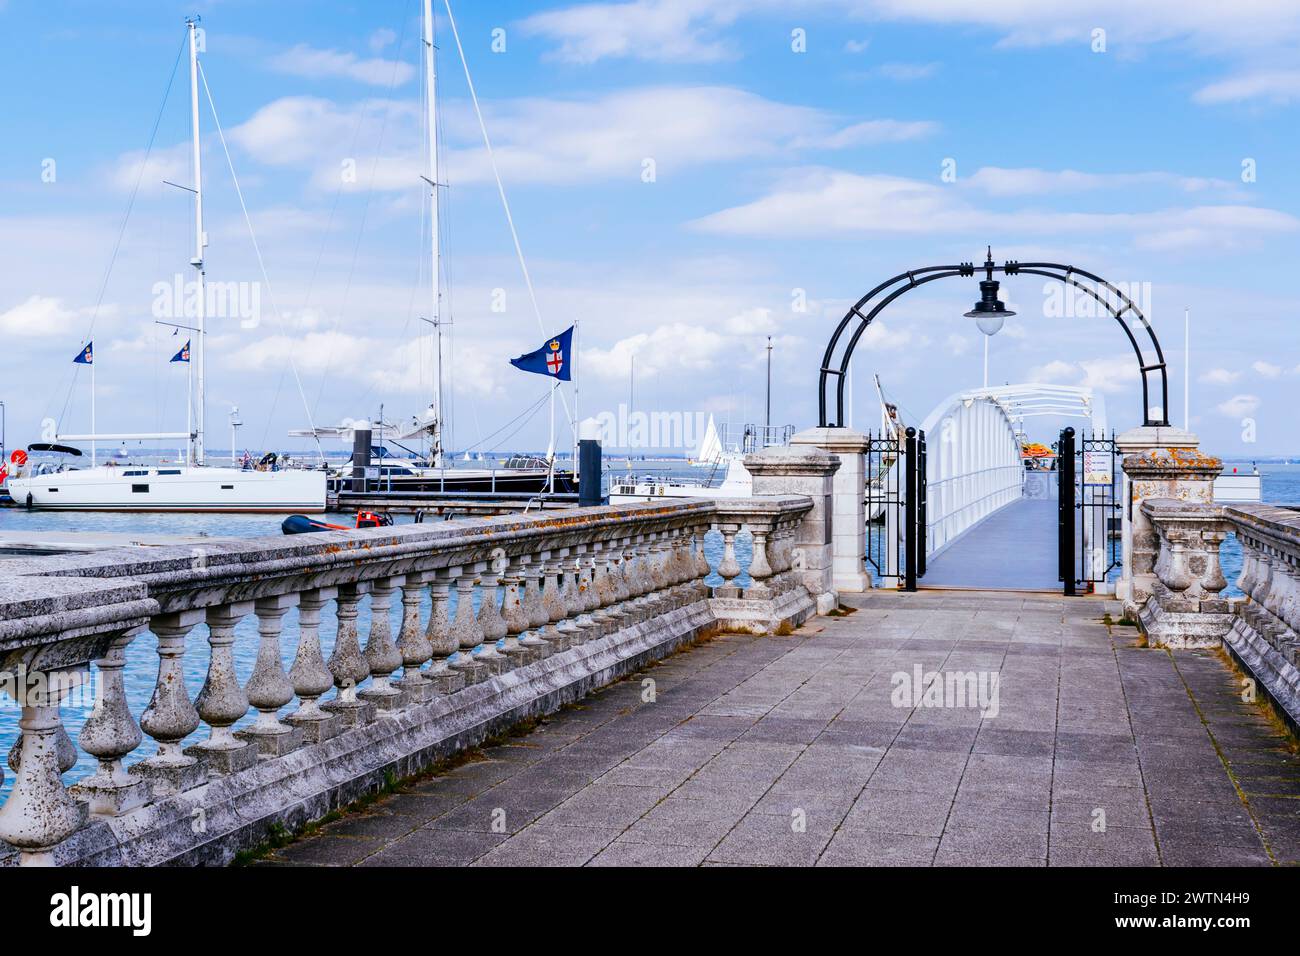 Pier, Cowes port. Cowes, Isle of Wight, England, United Kingdom, Europe Stock Photo